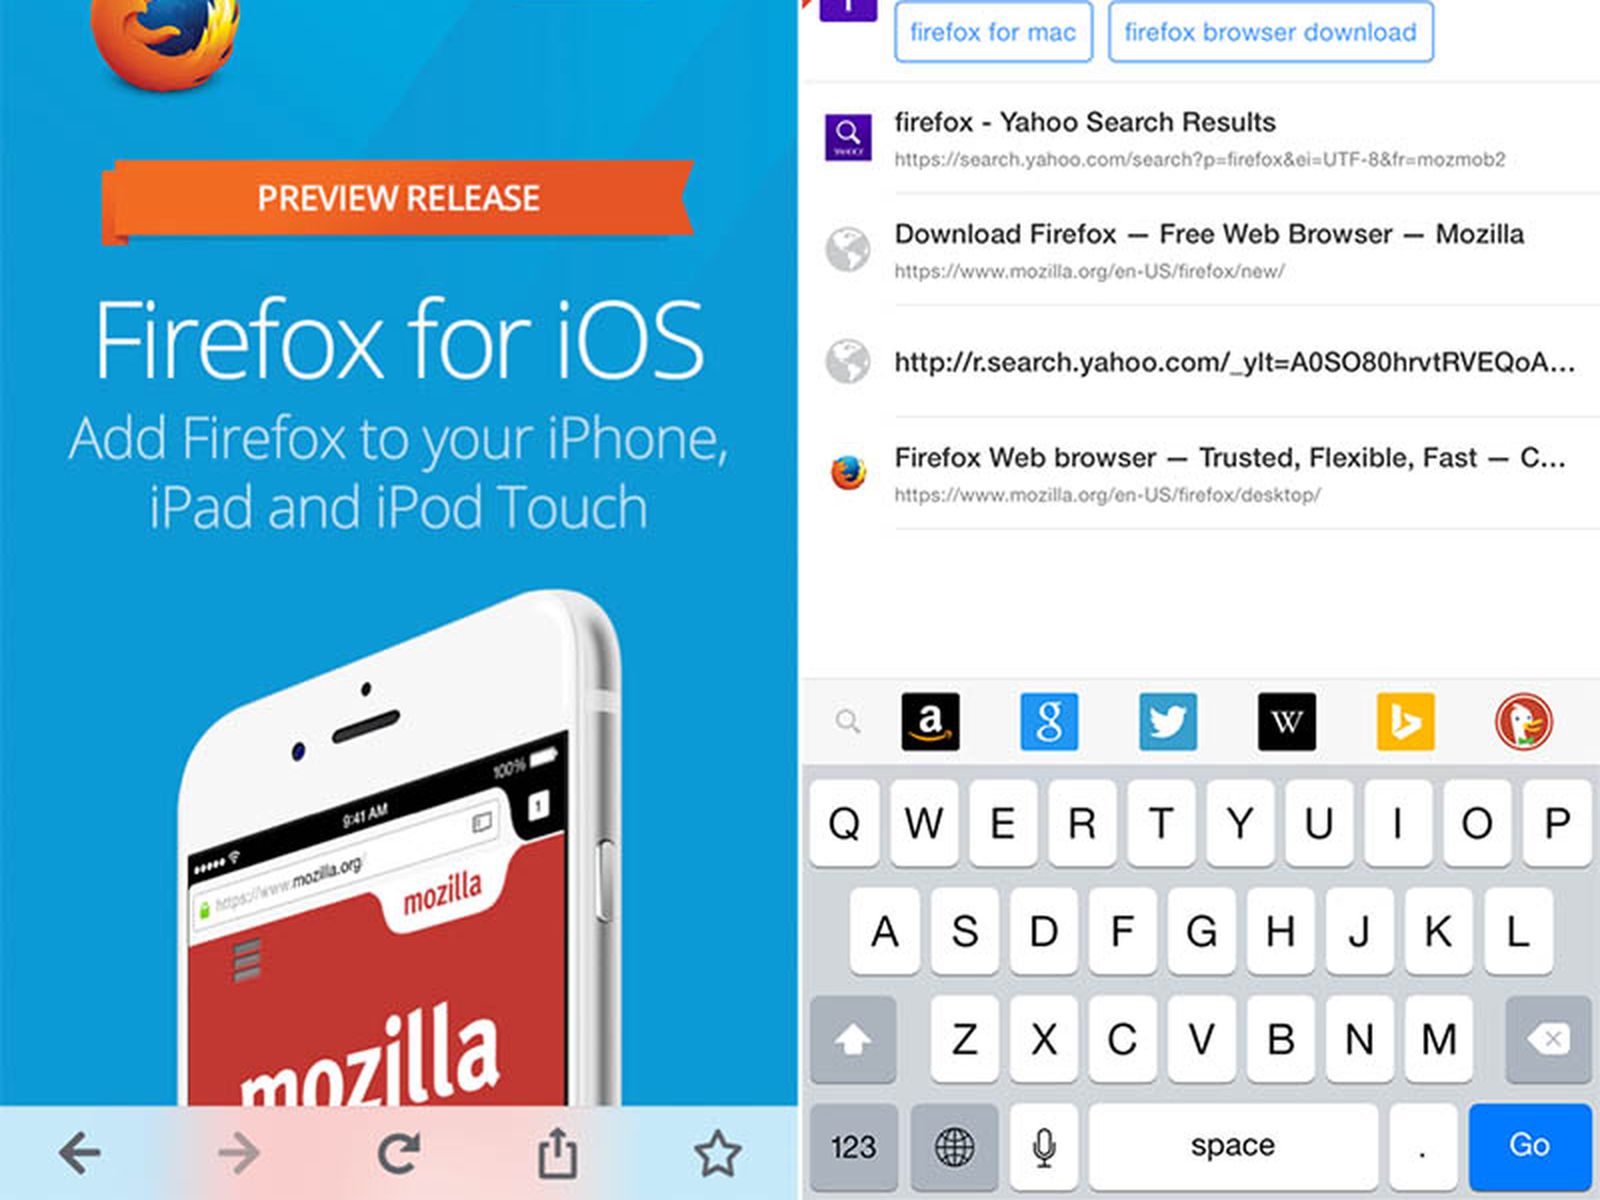 download firefox for mac 56